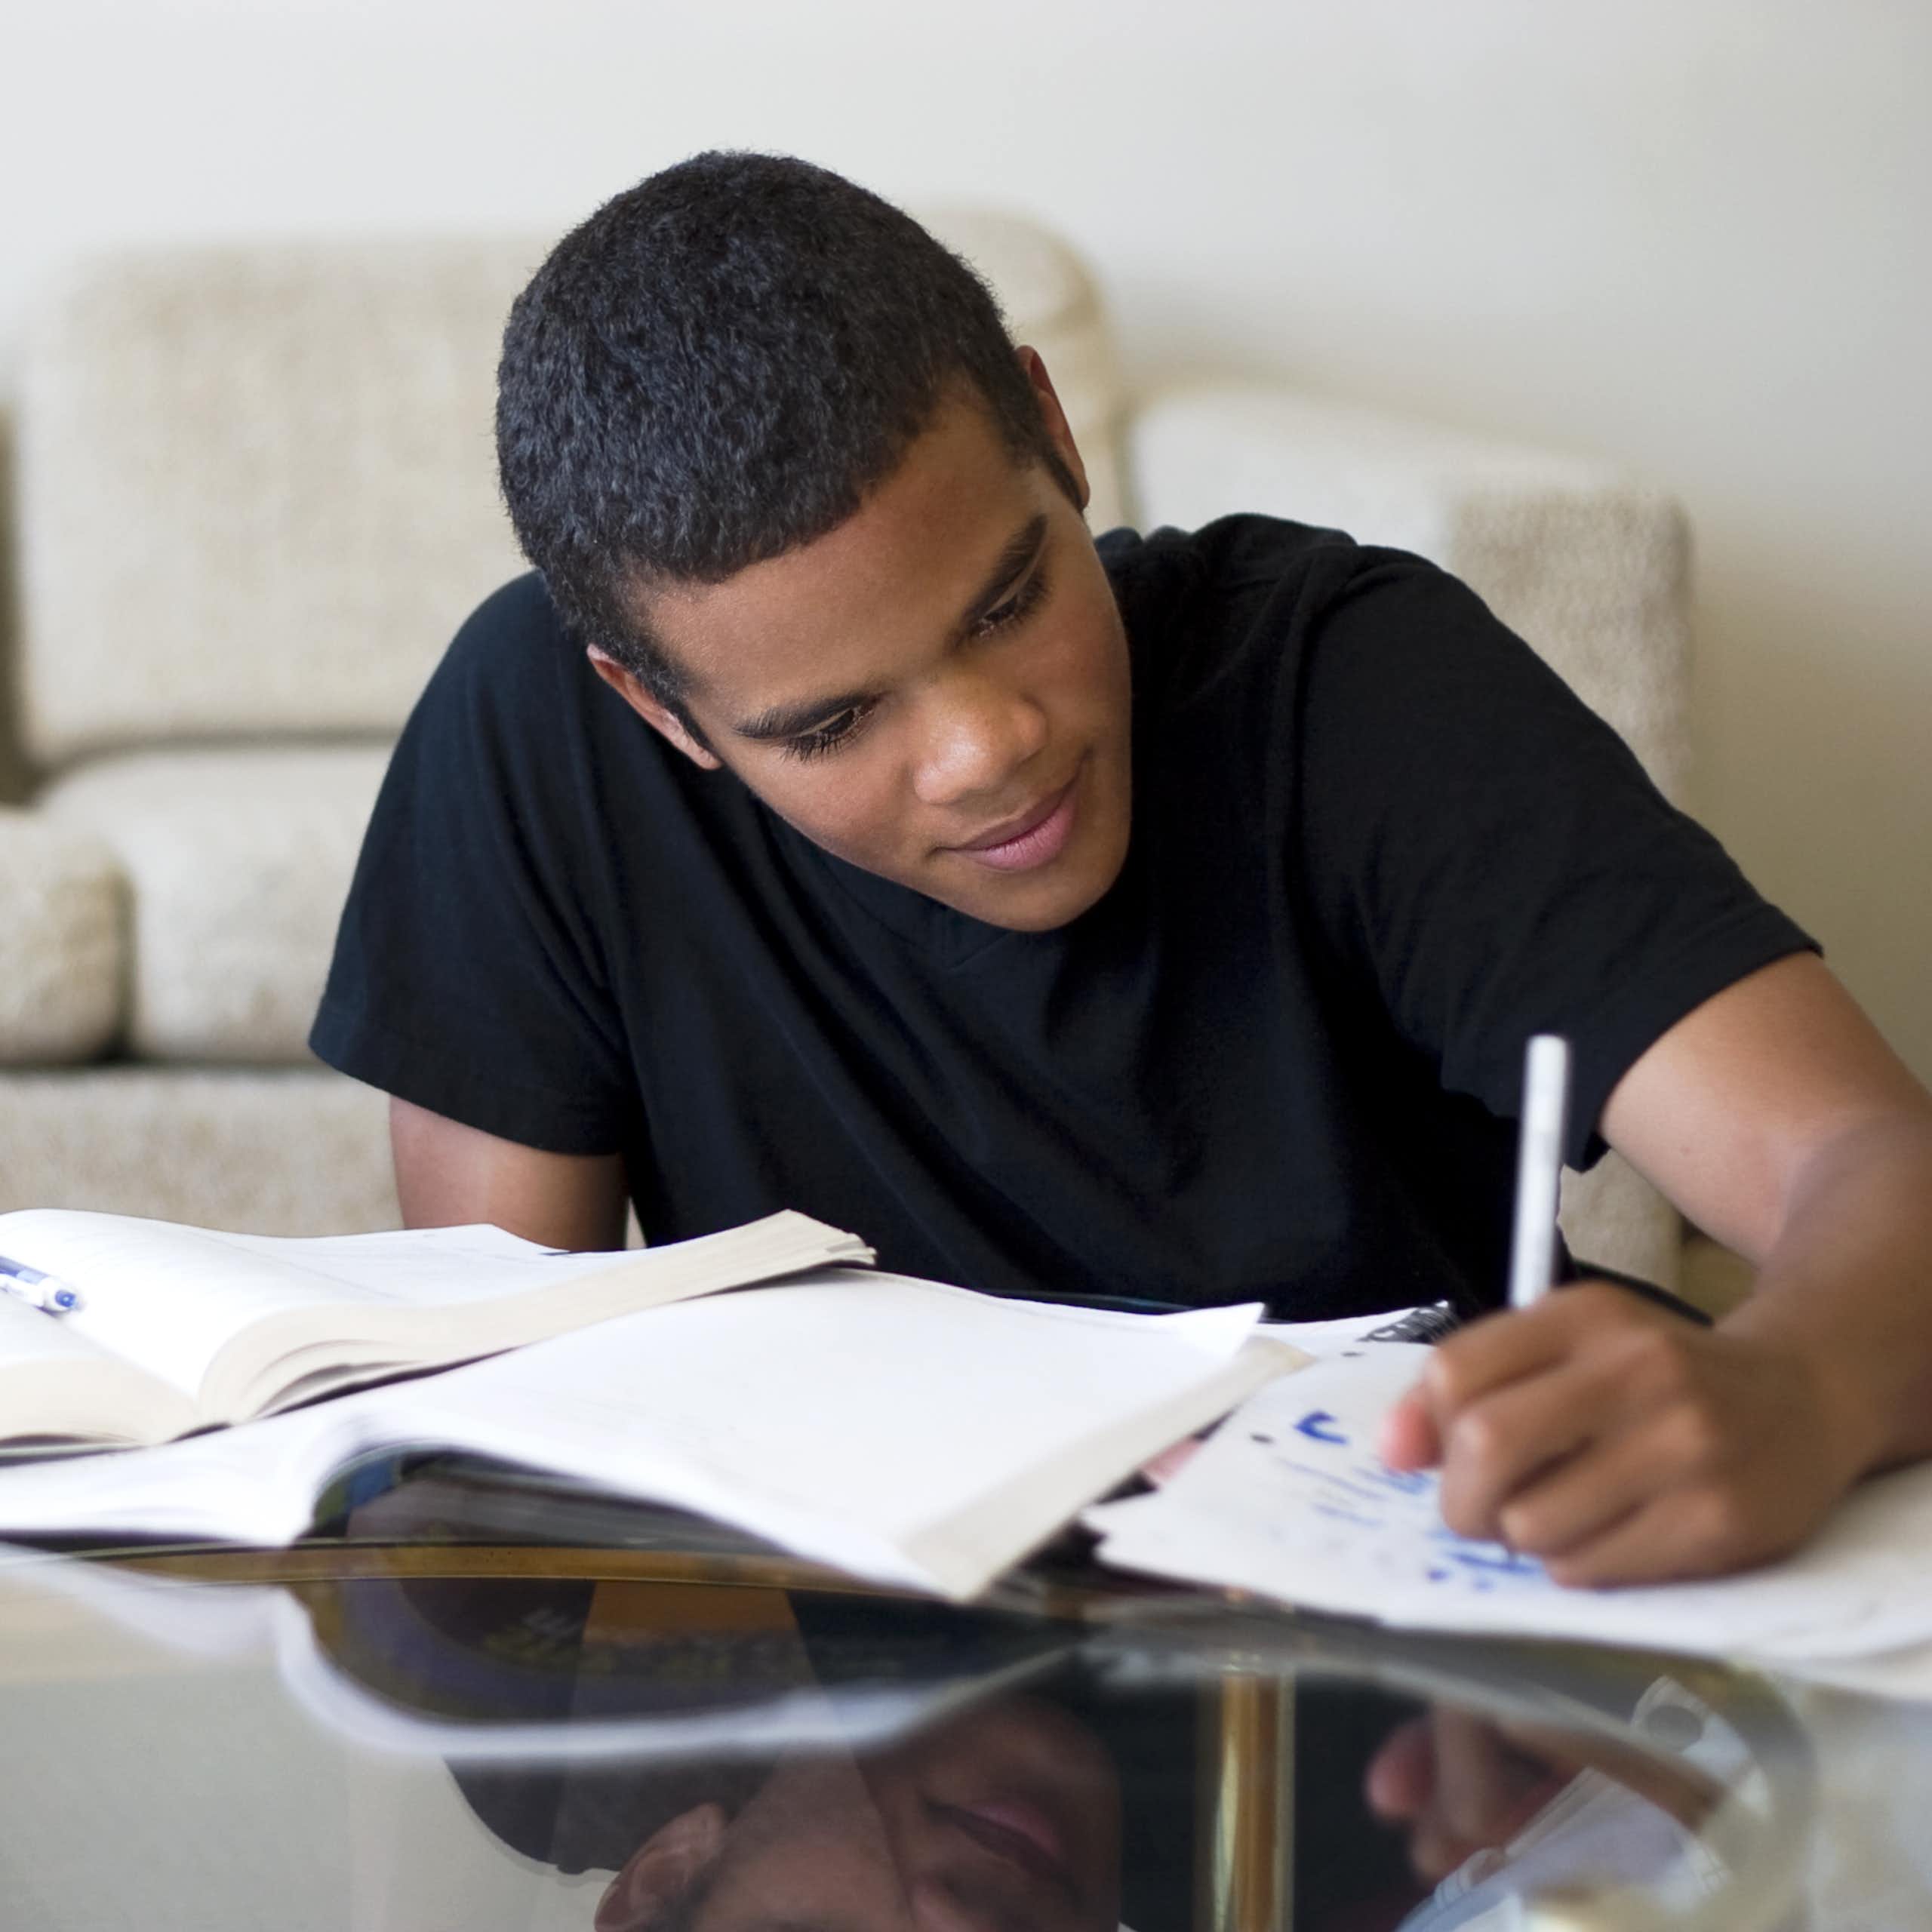 Teen boy studying at living room table